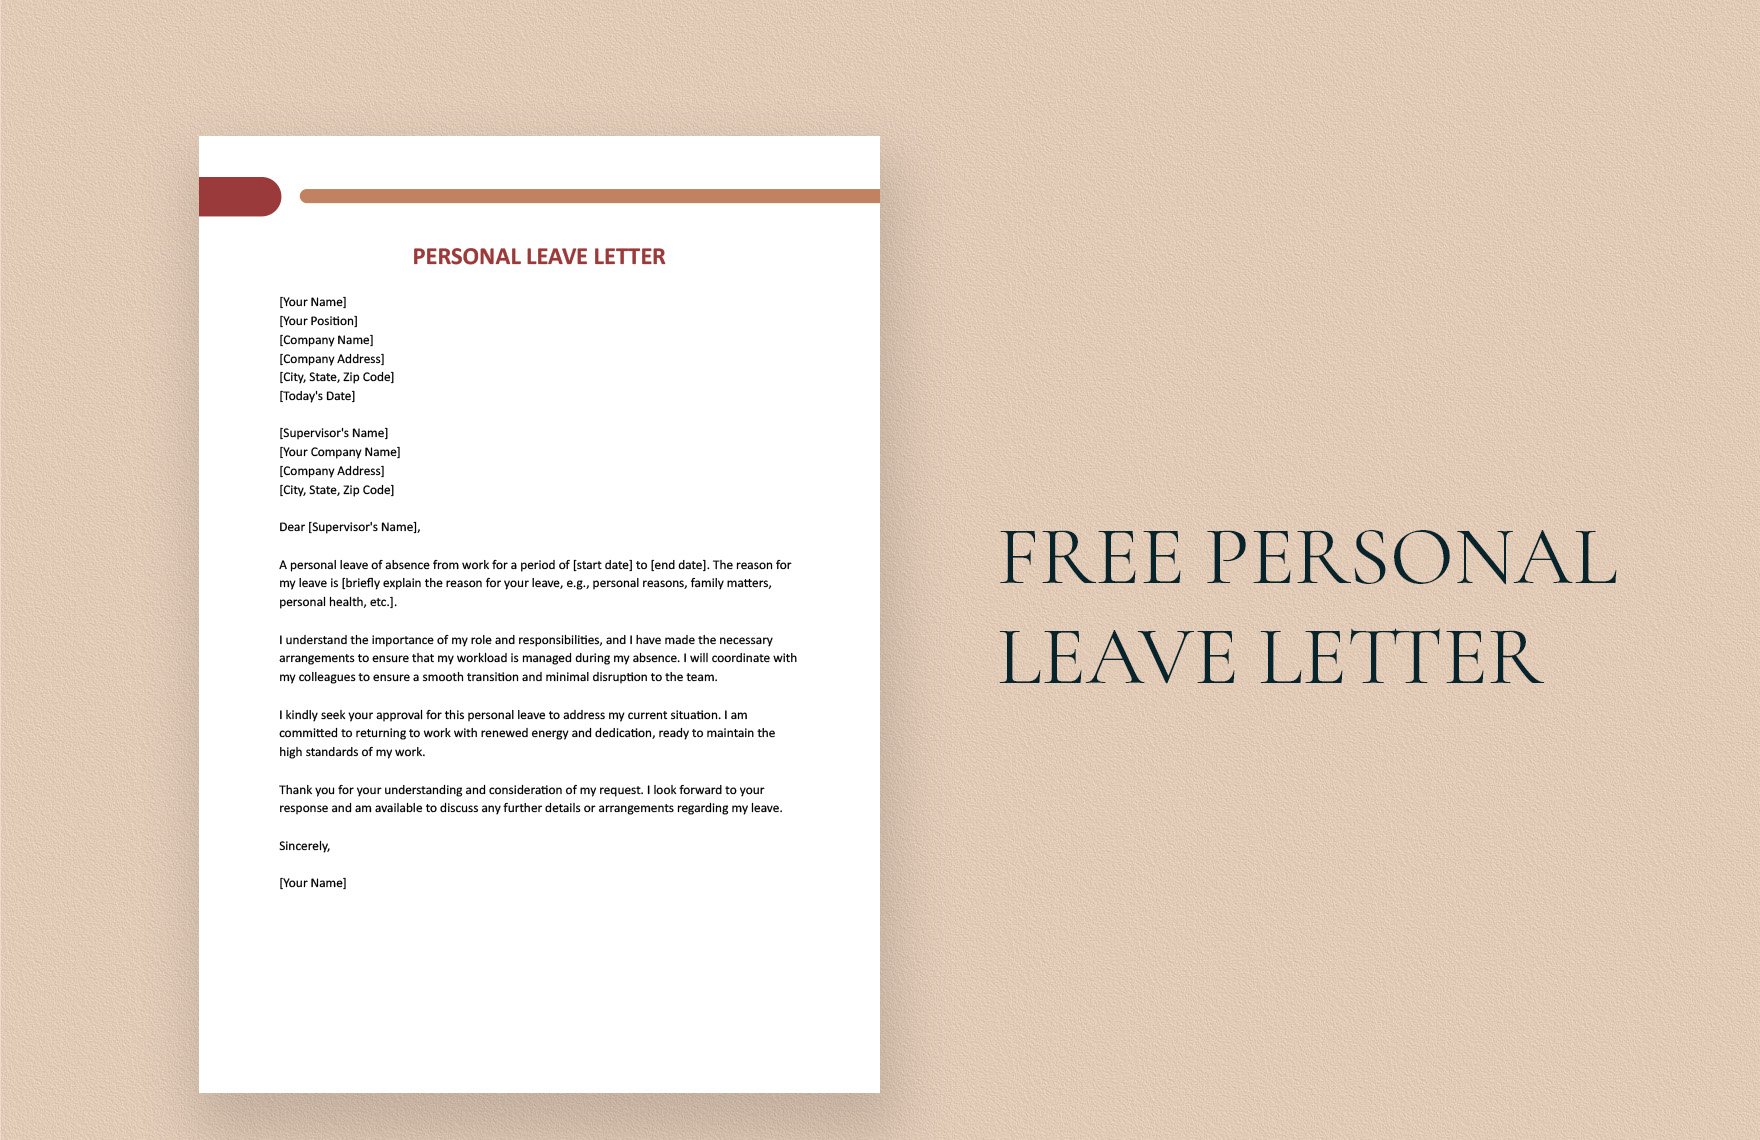 Personal Leave Letter